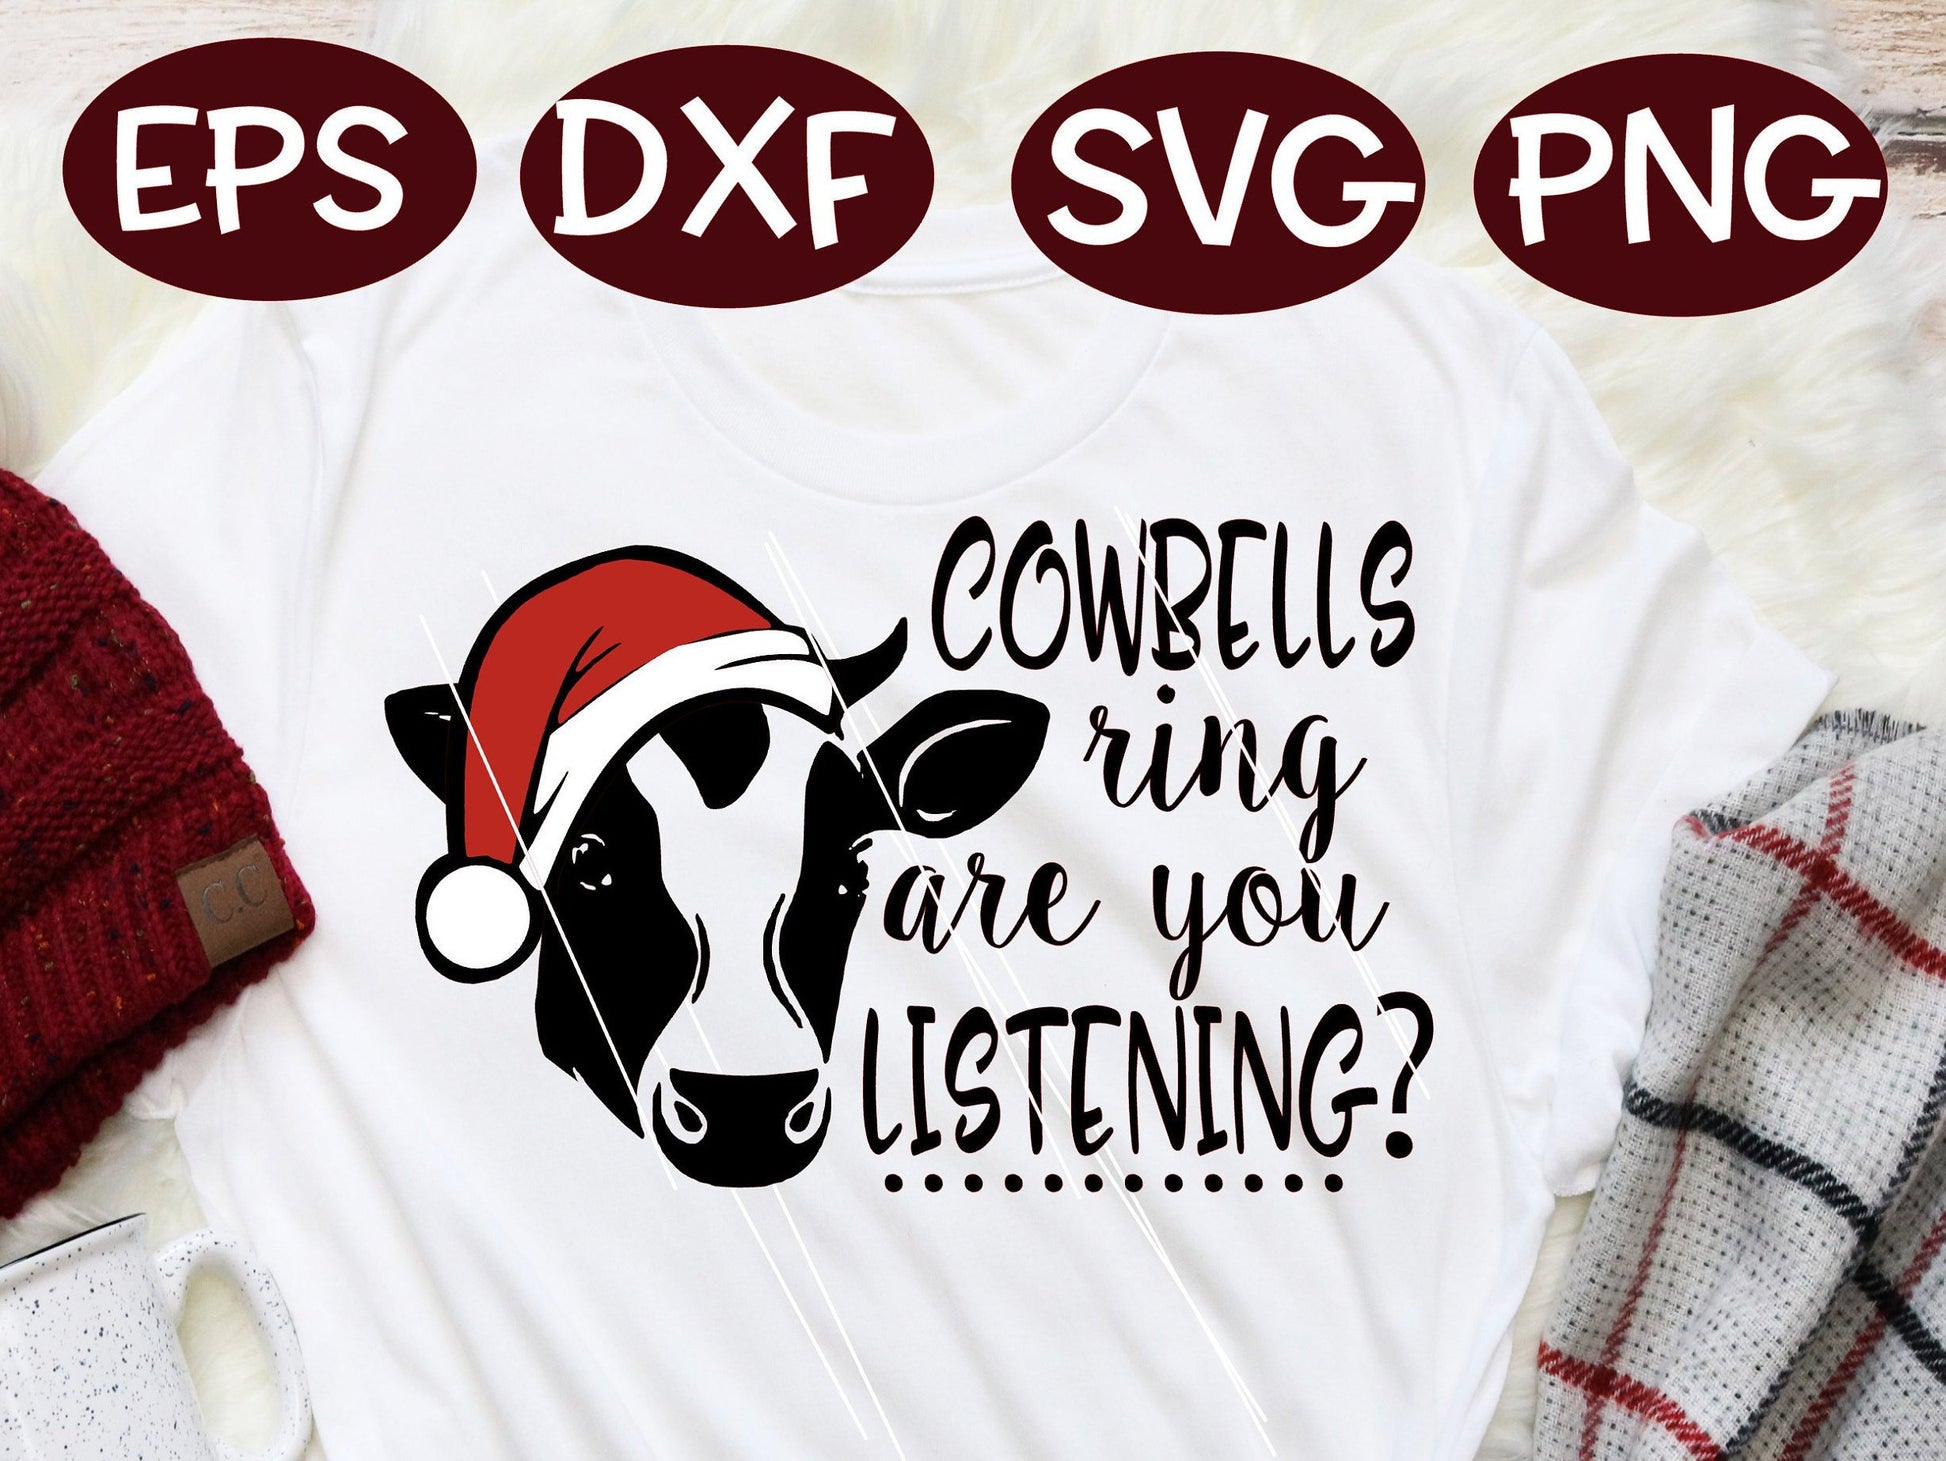 Cowbell Svg, Cowbell Png, Cowbell Clipart, Cowbell Dxf, Cowbell